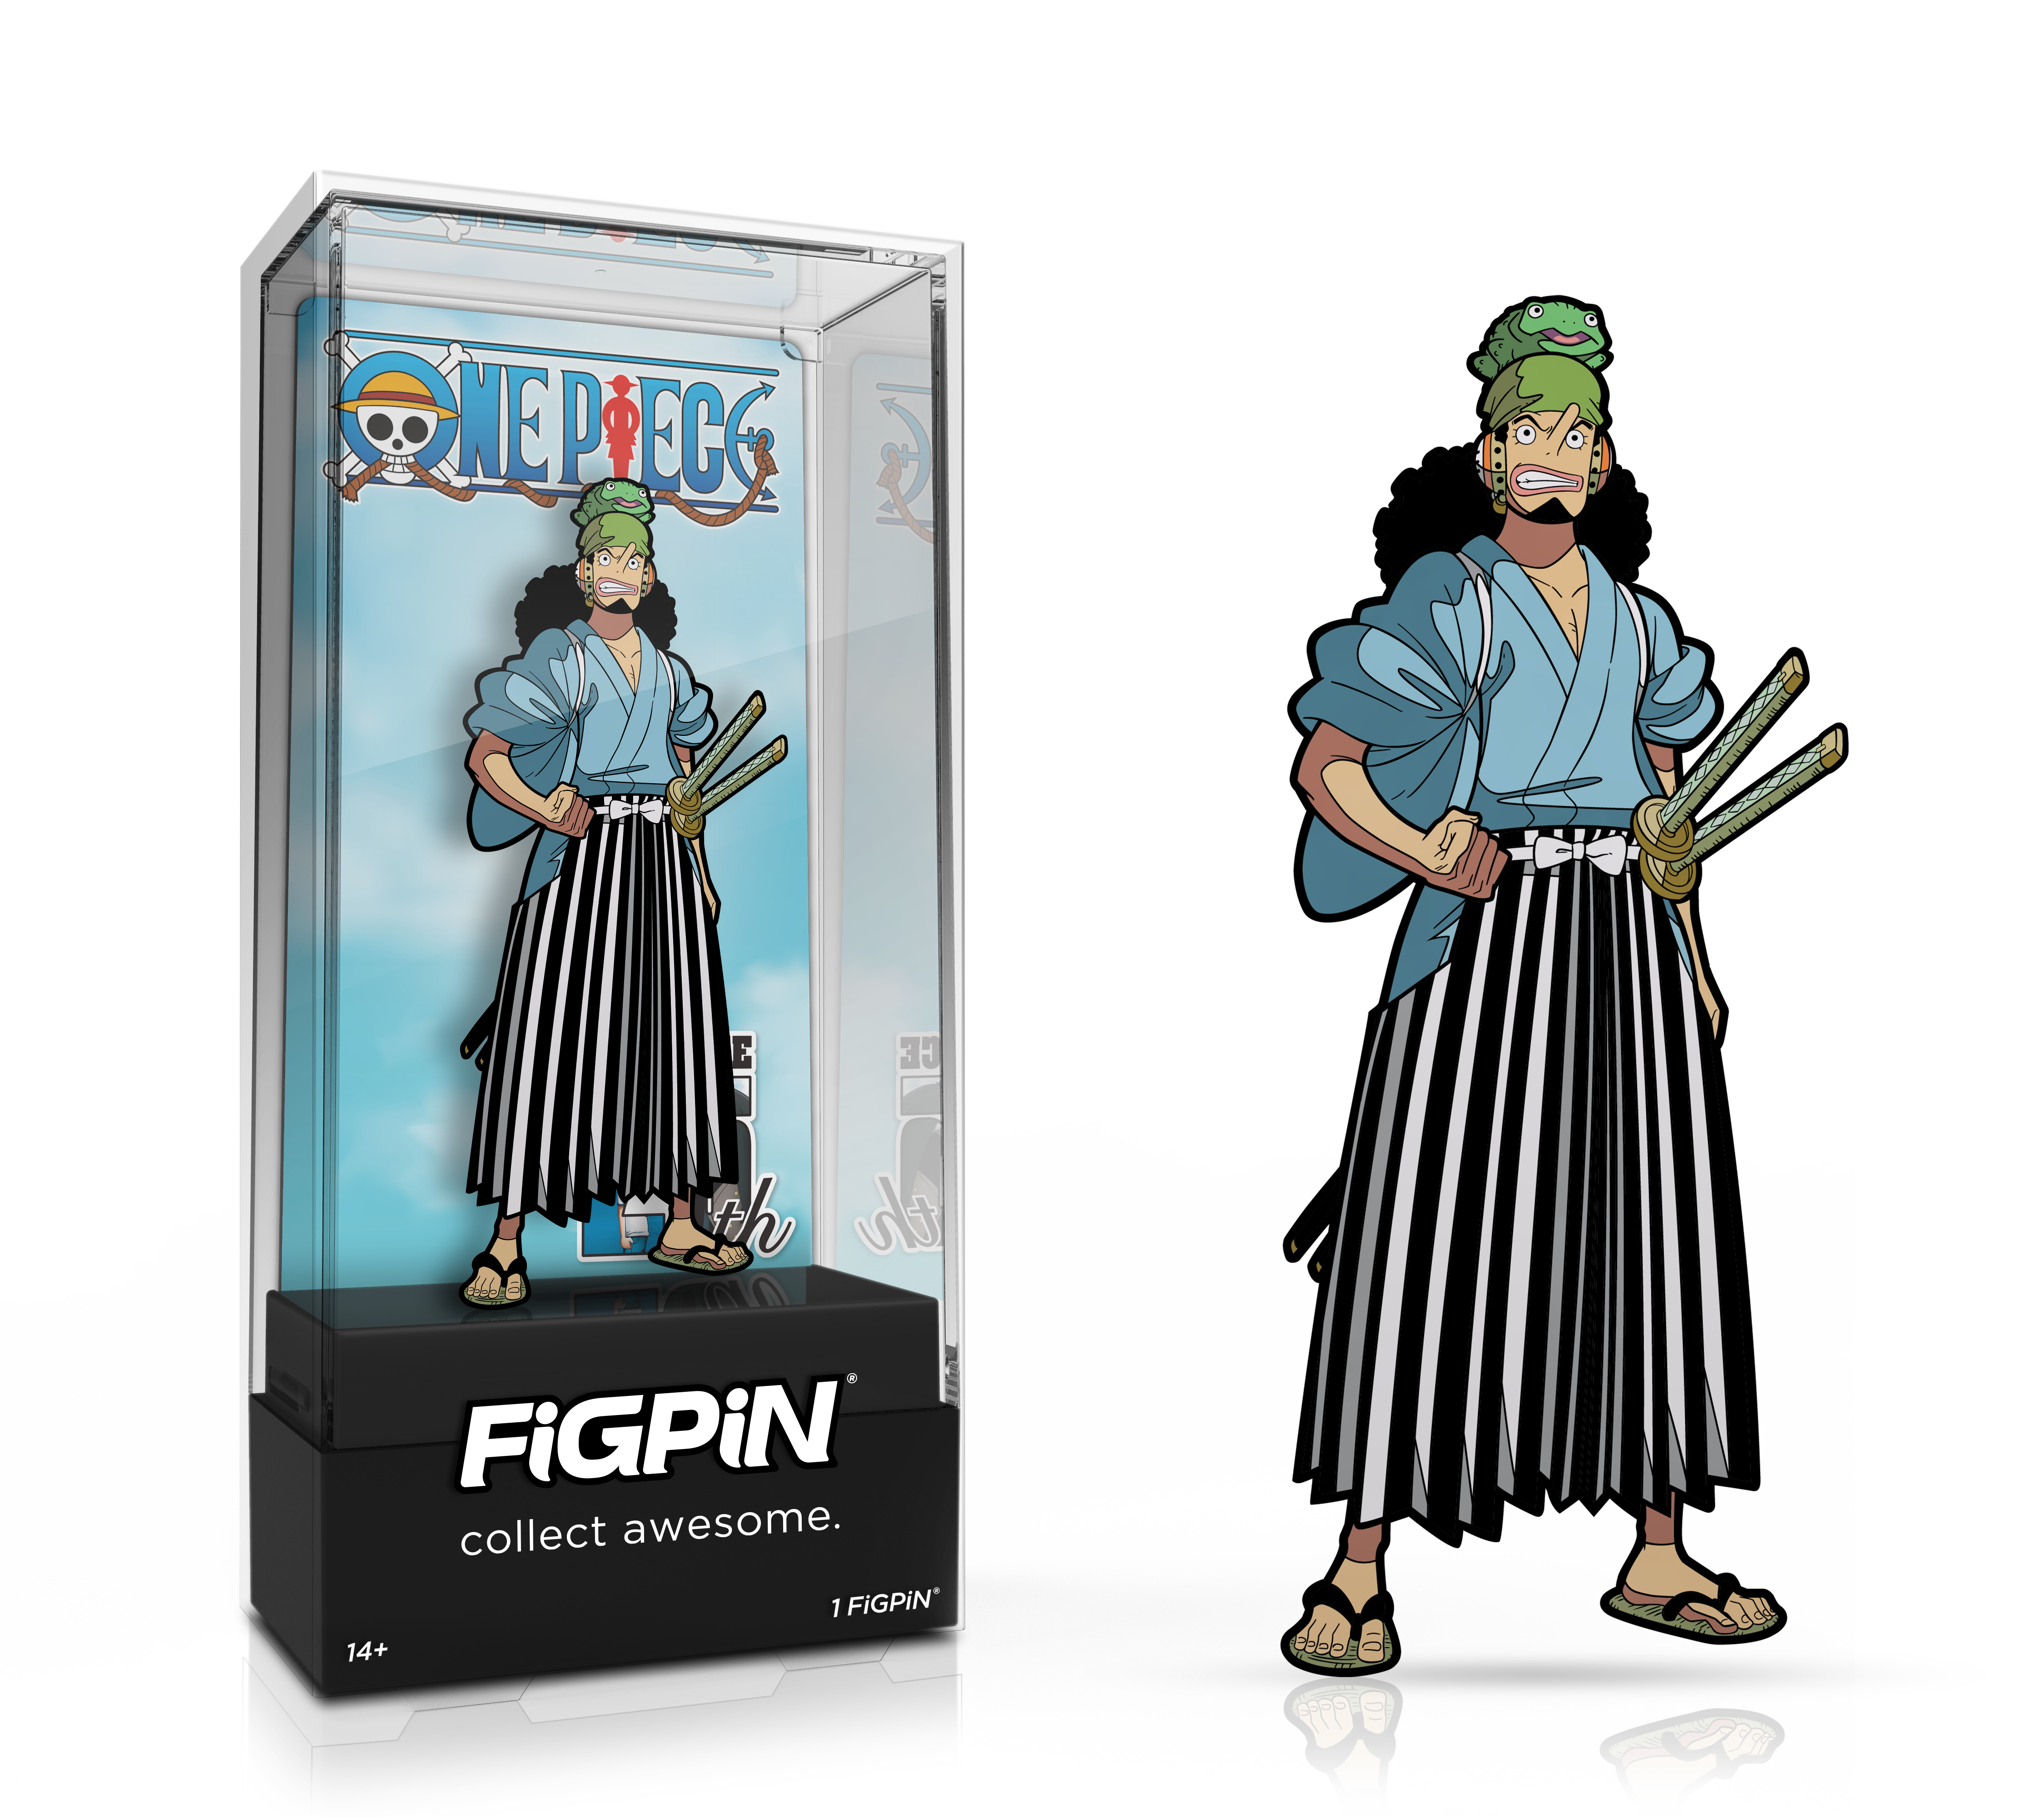 Side by side view of the Usohachi enamel pin in display case and the art render.